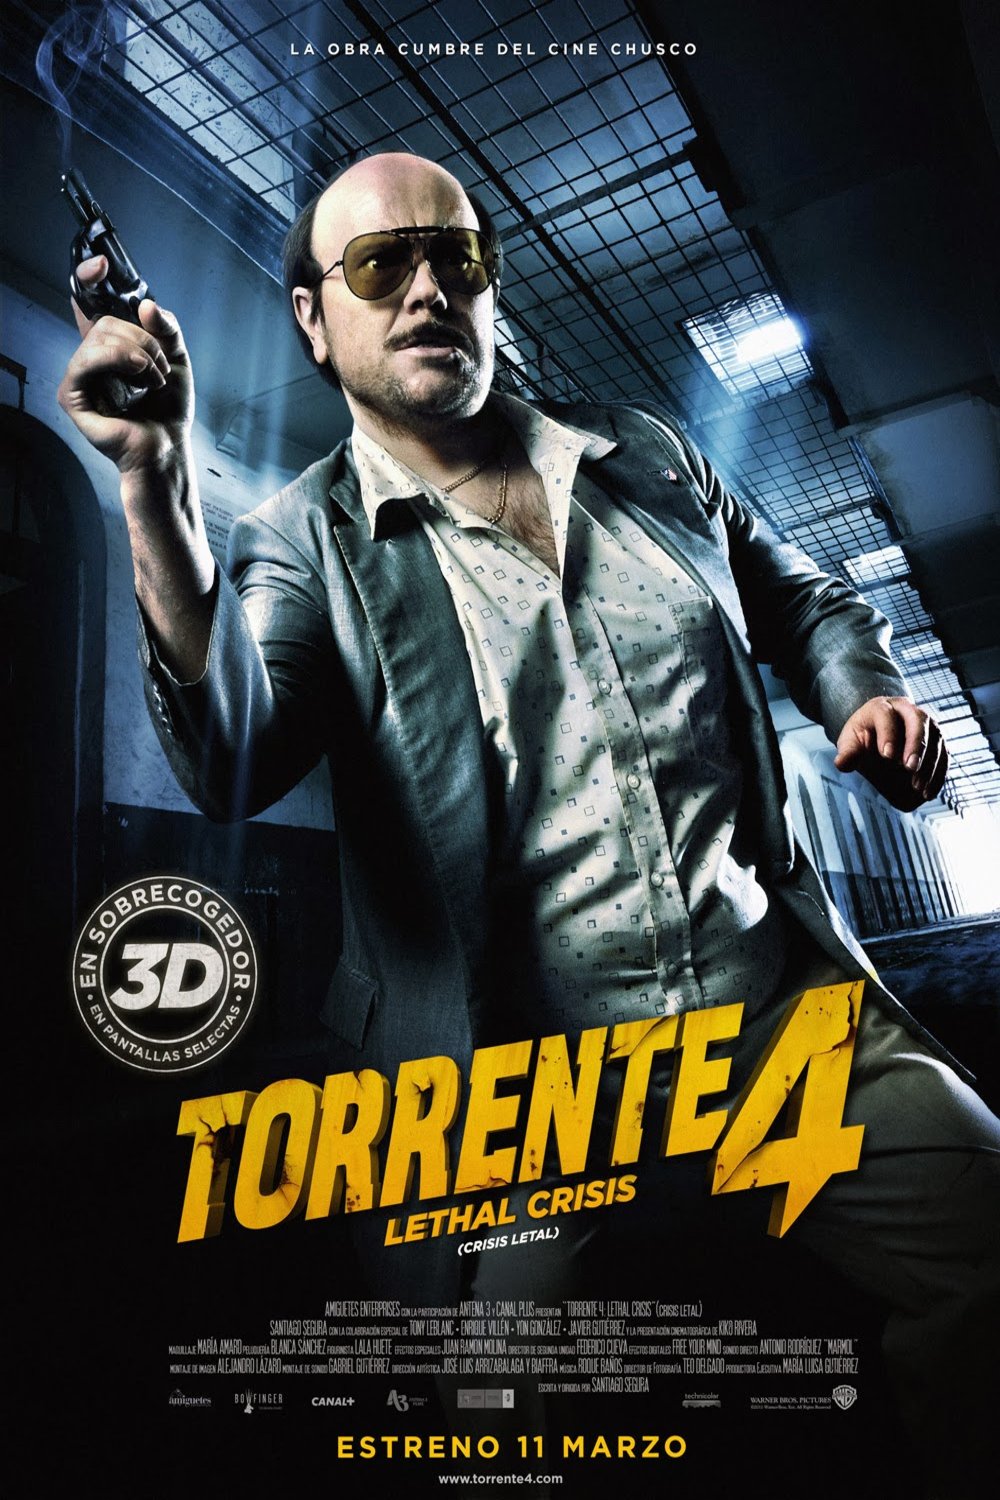 Spanish poster of the movie Torrente 4